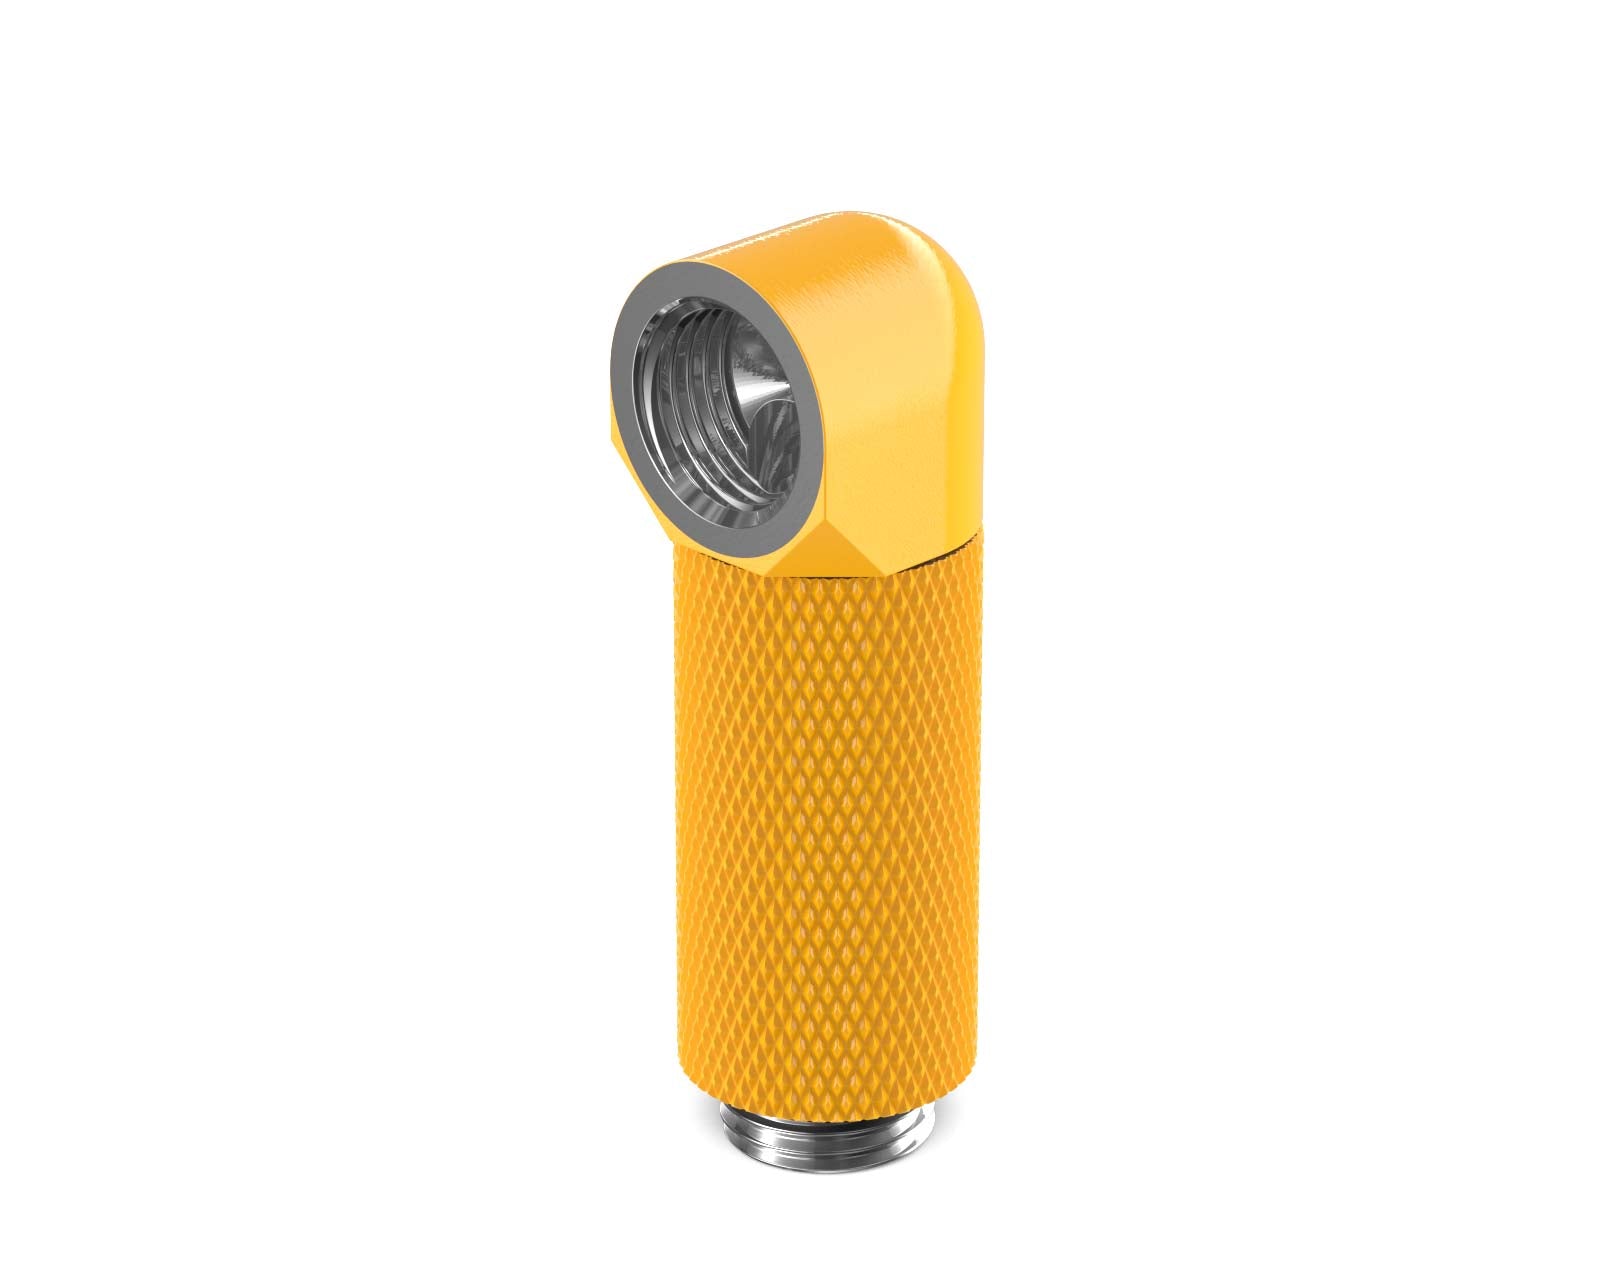 PrimoChill Male to Female G 1/4in. 90 Degree SX Rotary 35mm Extension Elbow Fitting - PrimoChill - KEEPING IT COOL Yellow